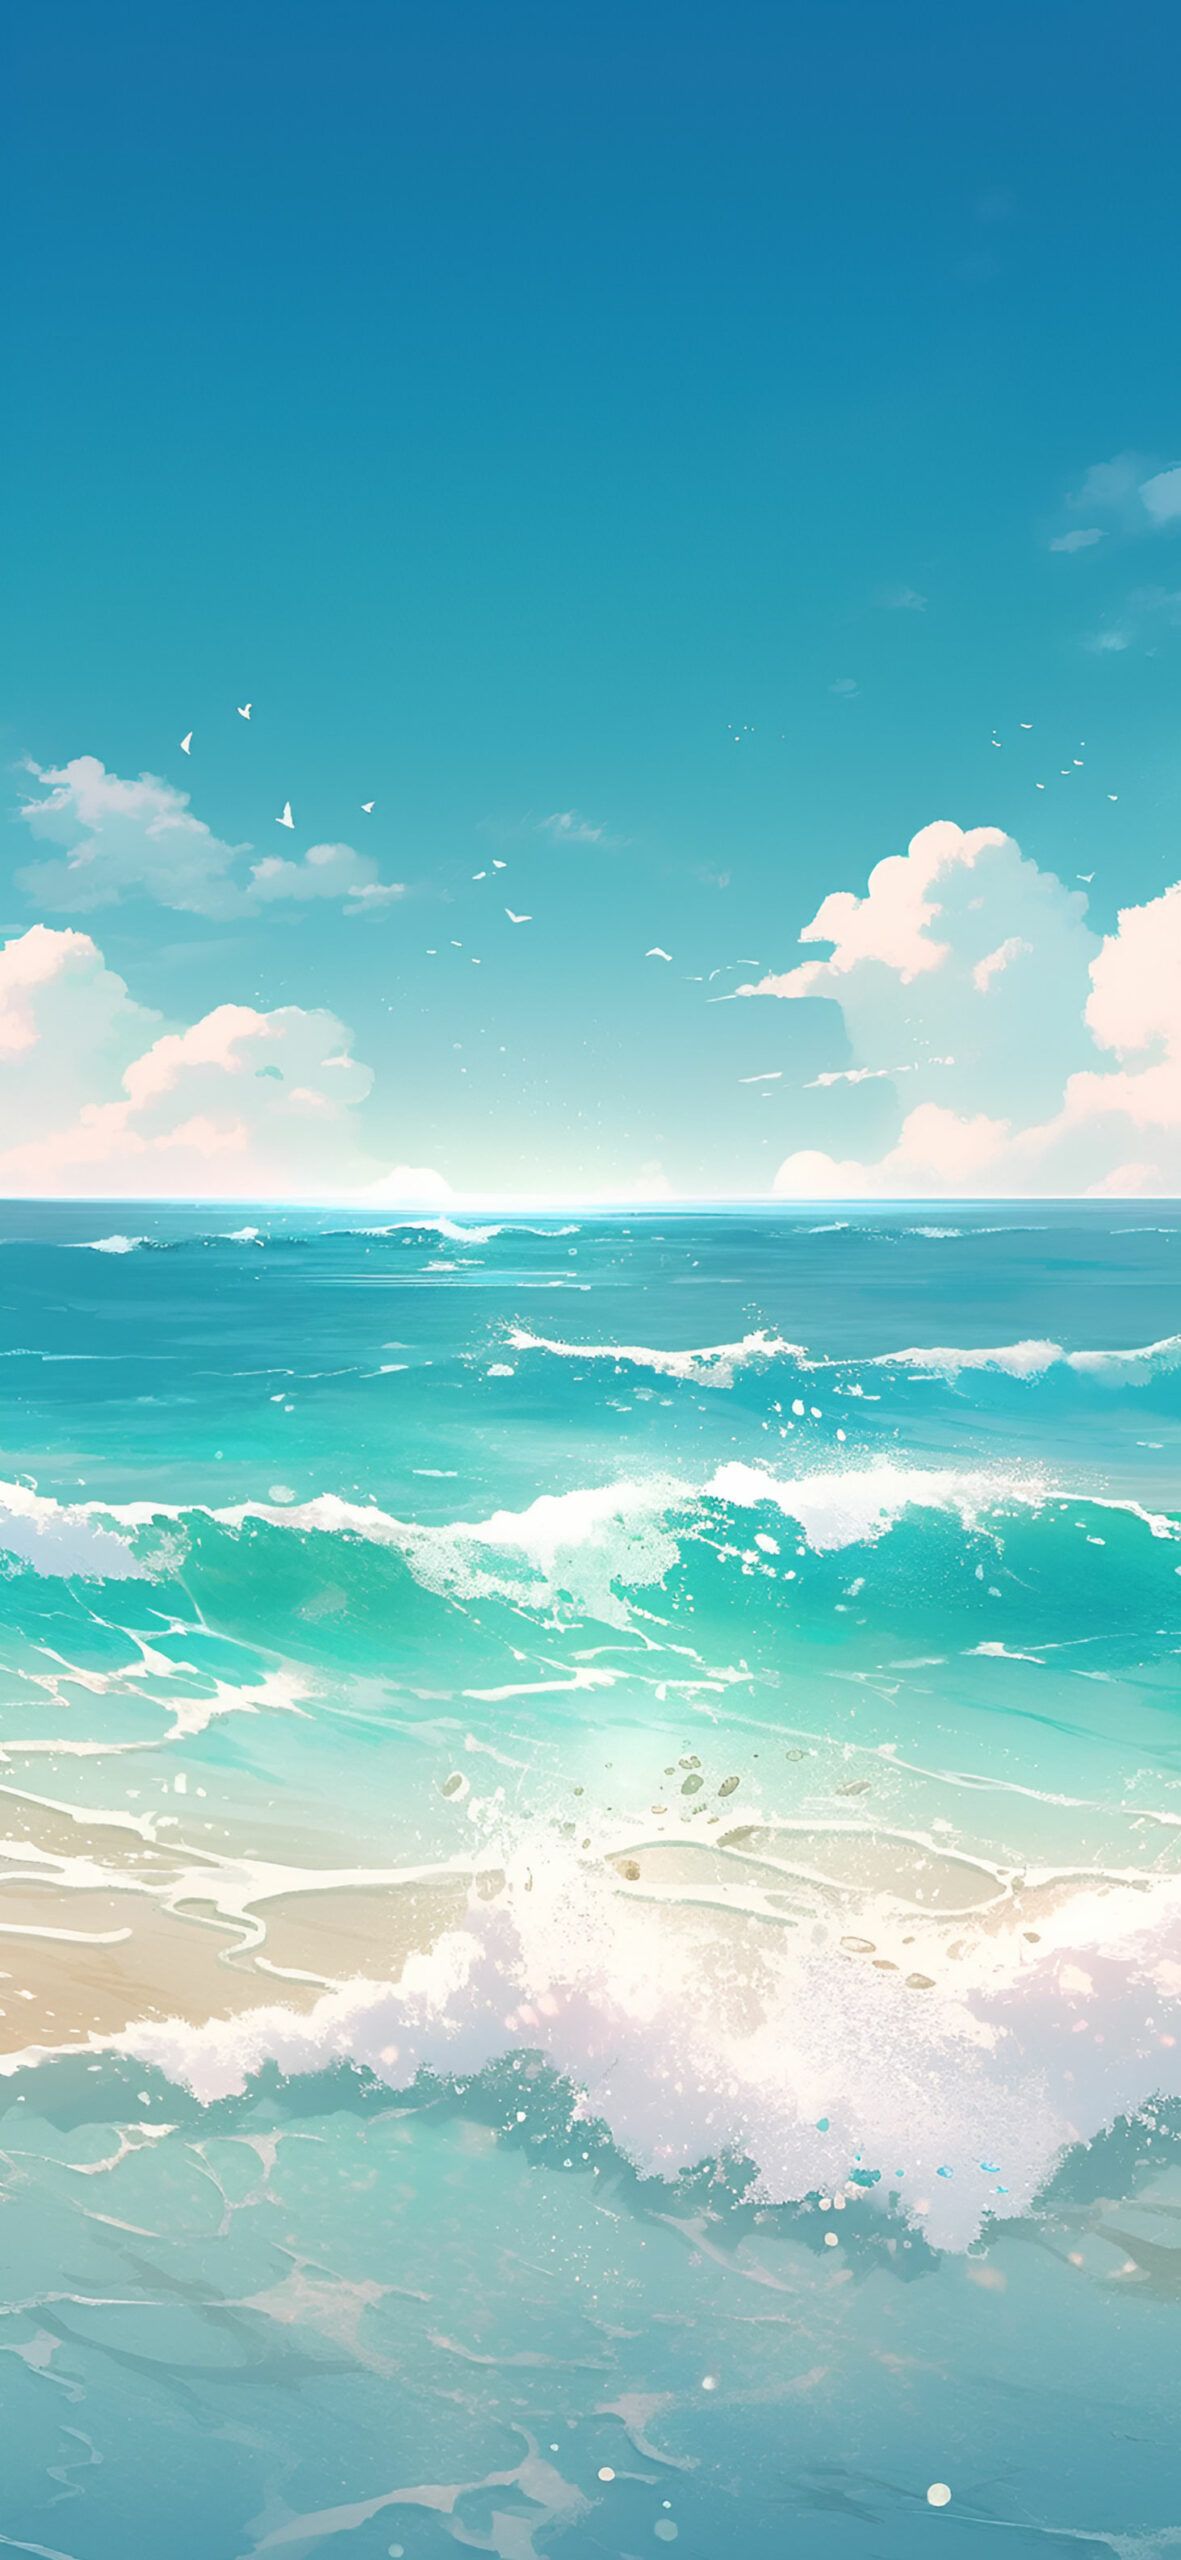 Aesthetic Turquoise Ocean & Clouds Wallpaper - Turquoise